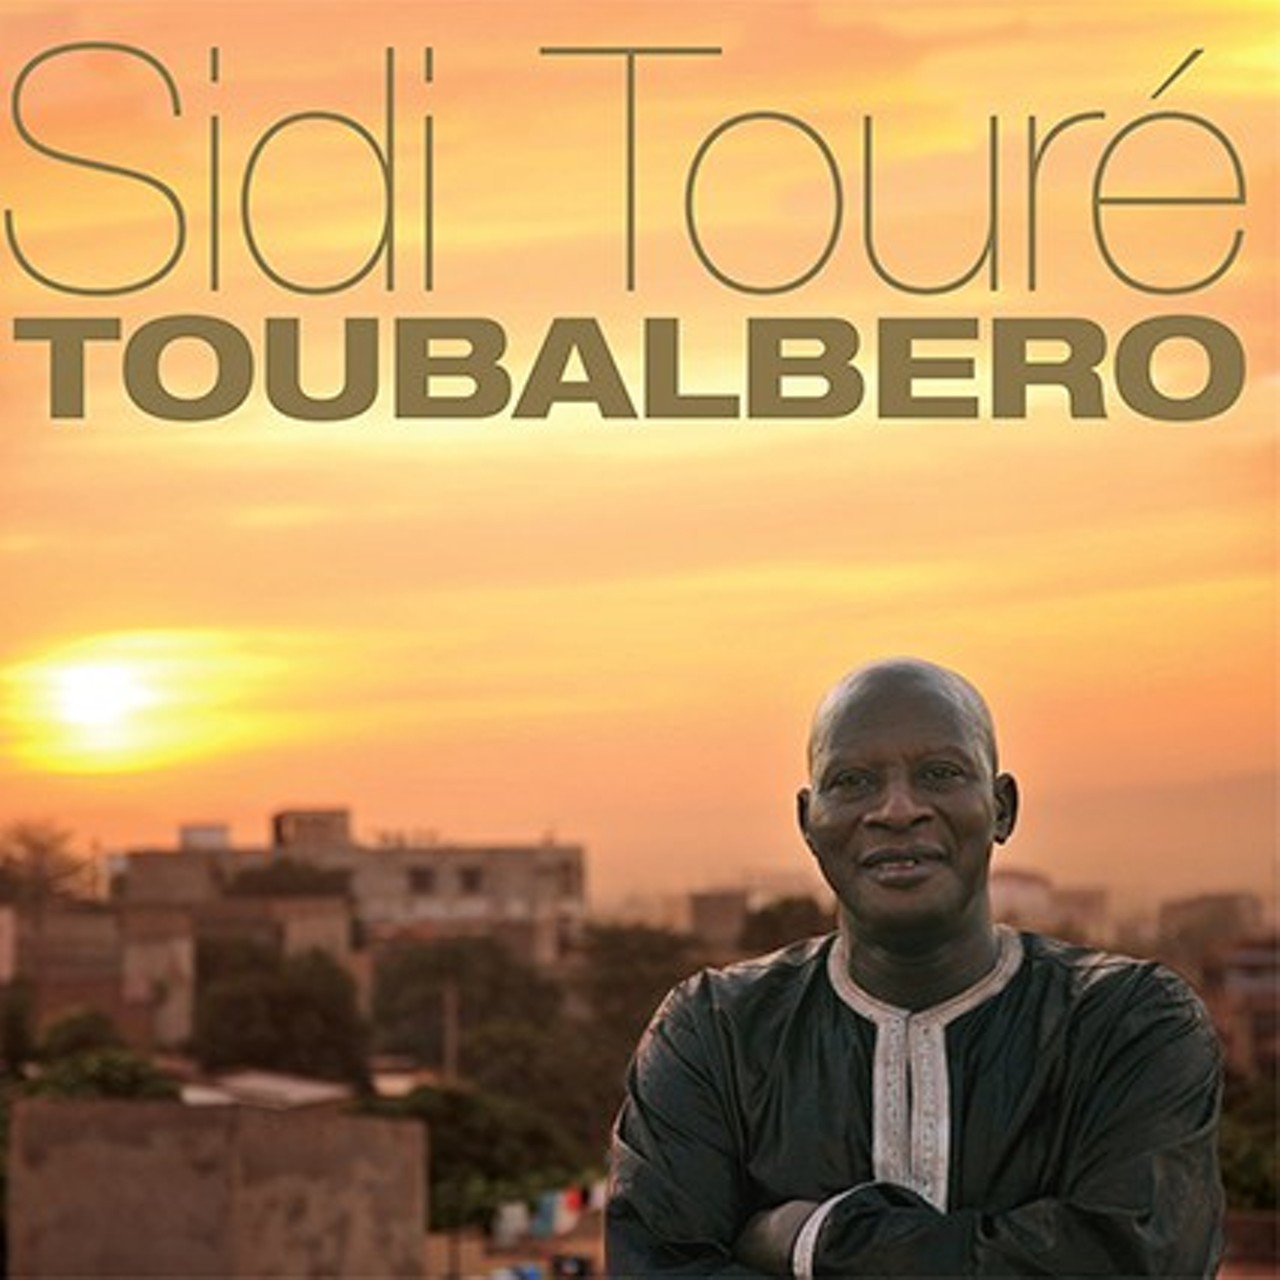  City Stages with Sidi Toure
Wed, July 18
Album Cover Photo